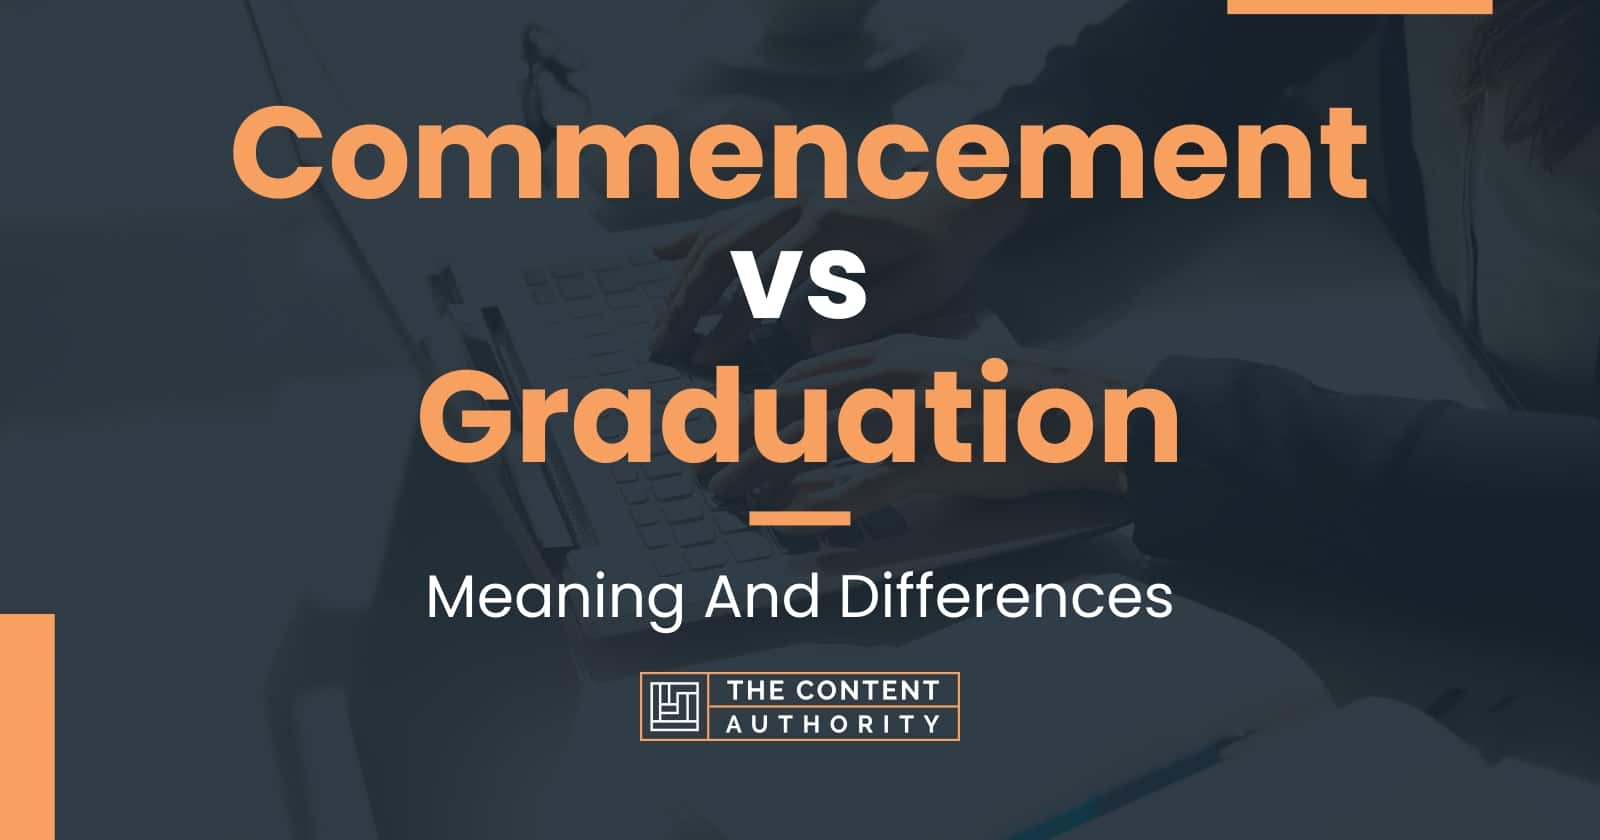 Commencement vs Graduation Meaning And Differences